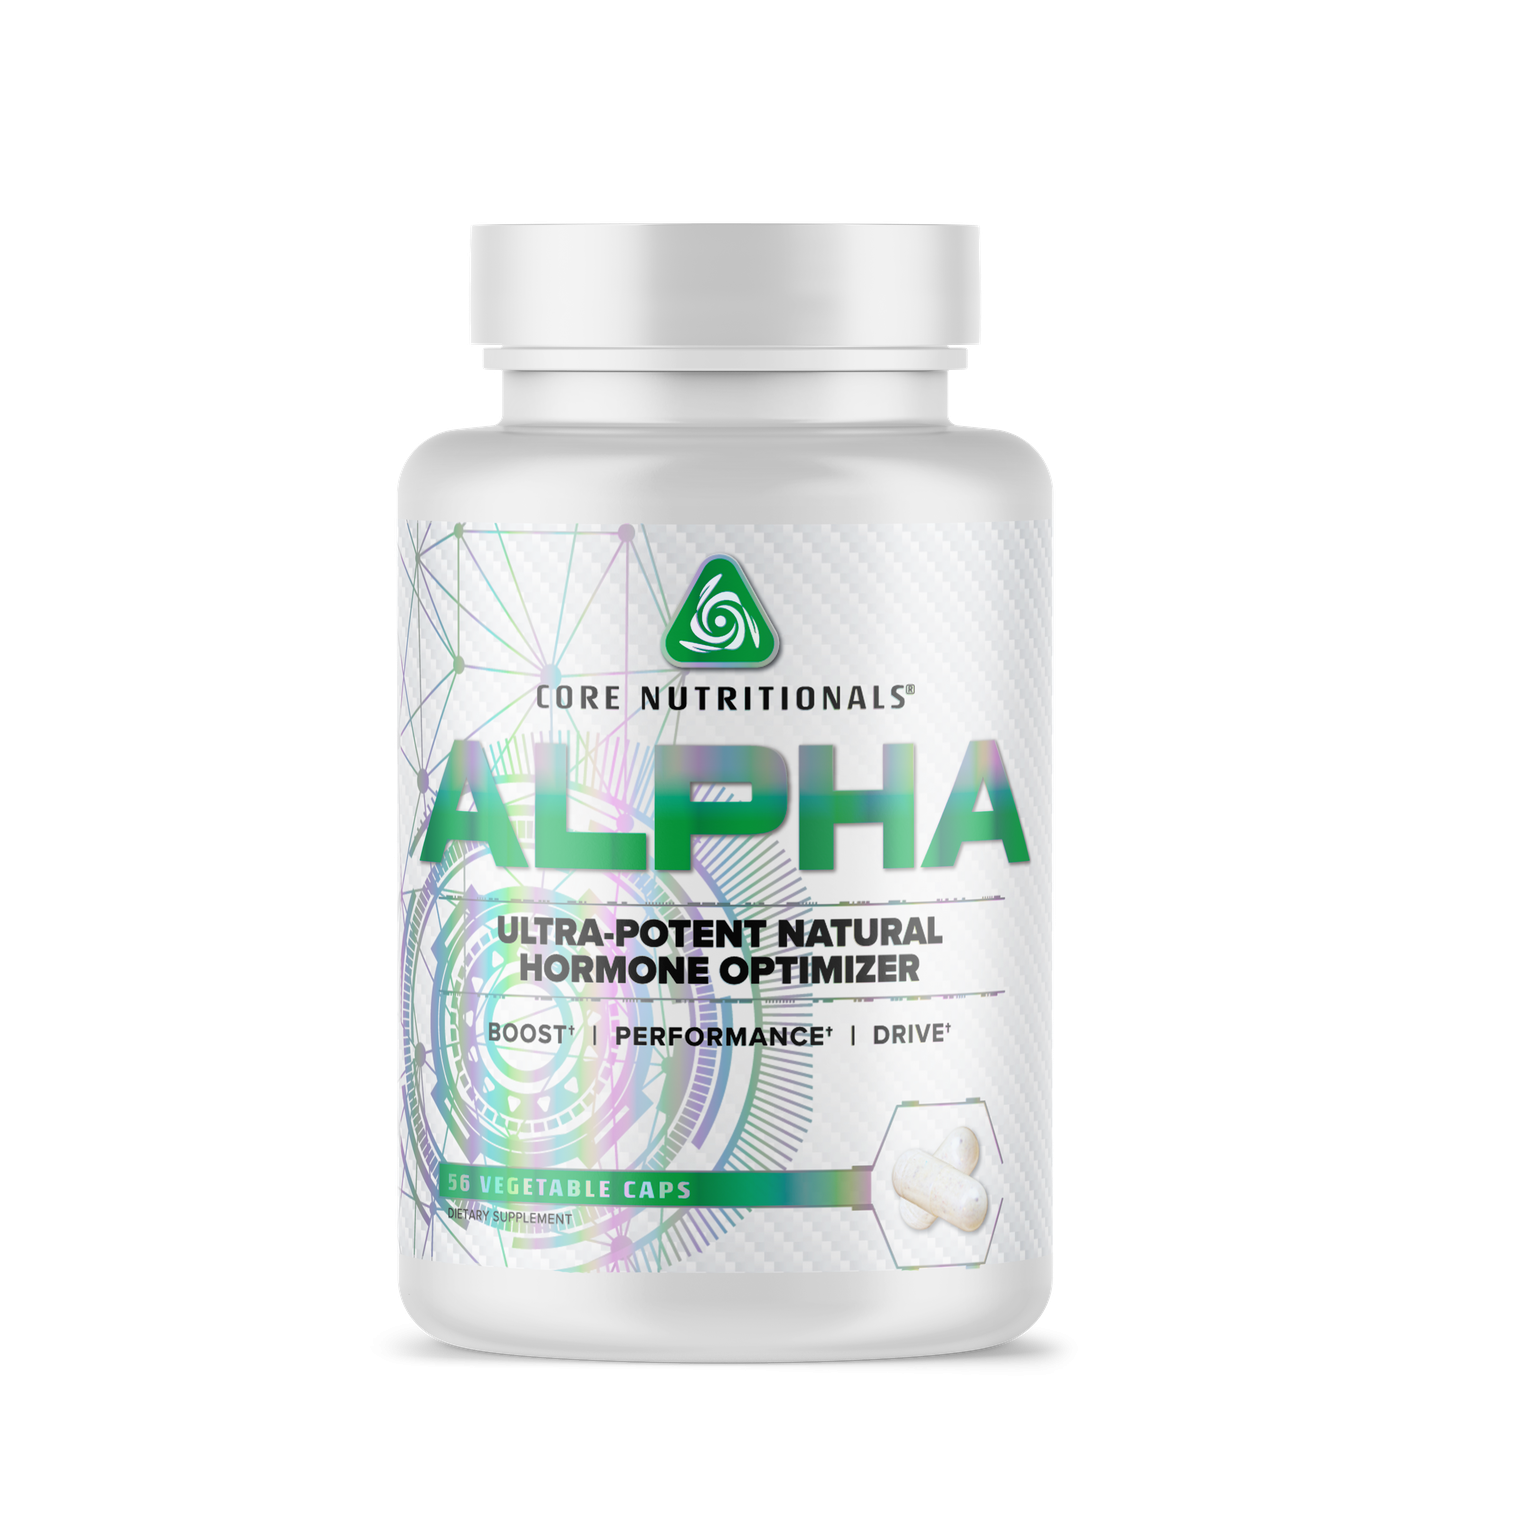 Core Nutritionals Alpha – Muscle Building – Professional Supplements & Protein From A-list Nutrition